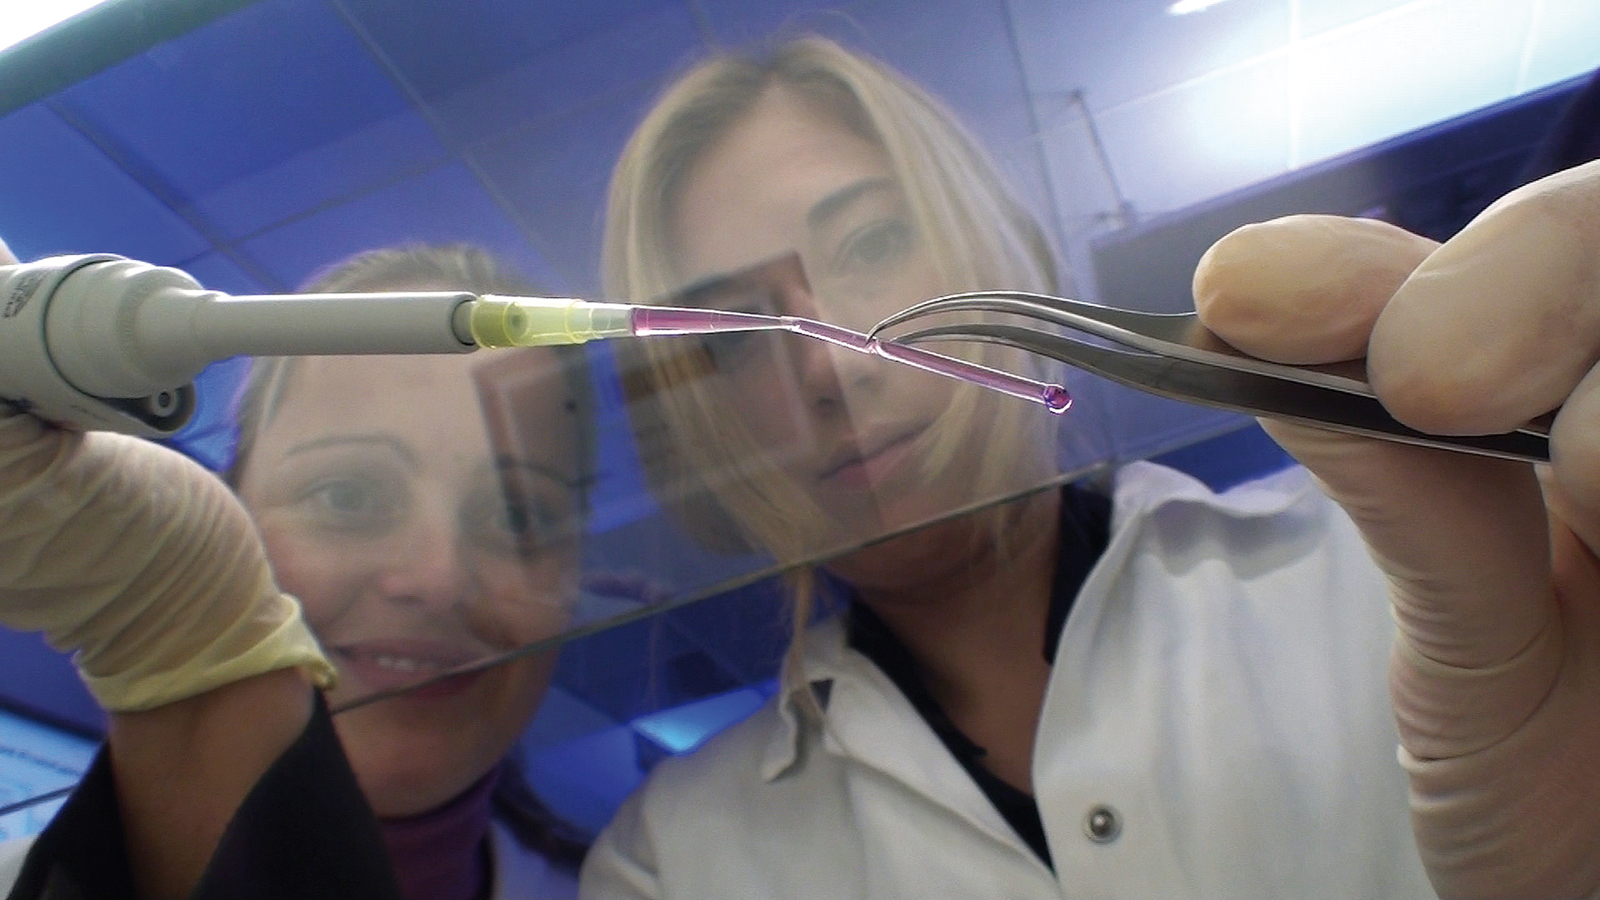 picture: Scienetists flushing a blood vessel